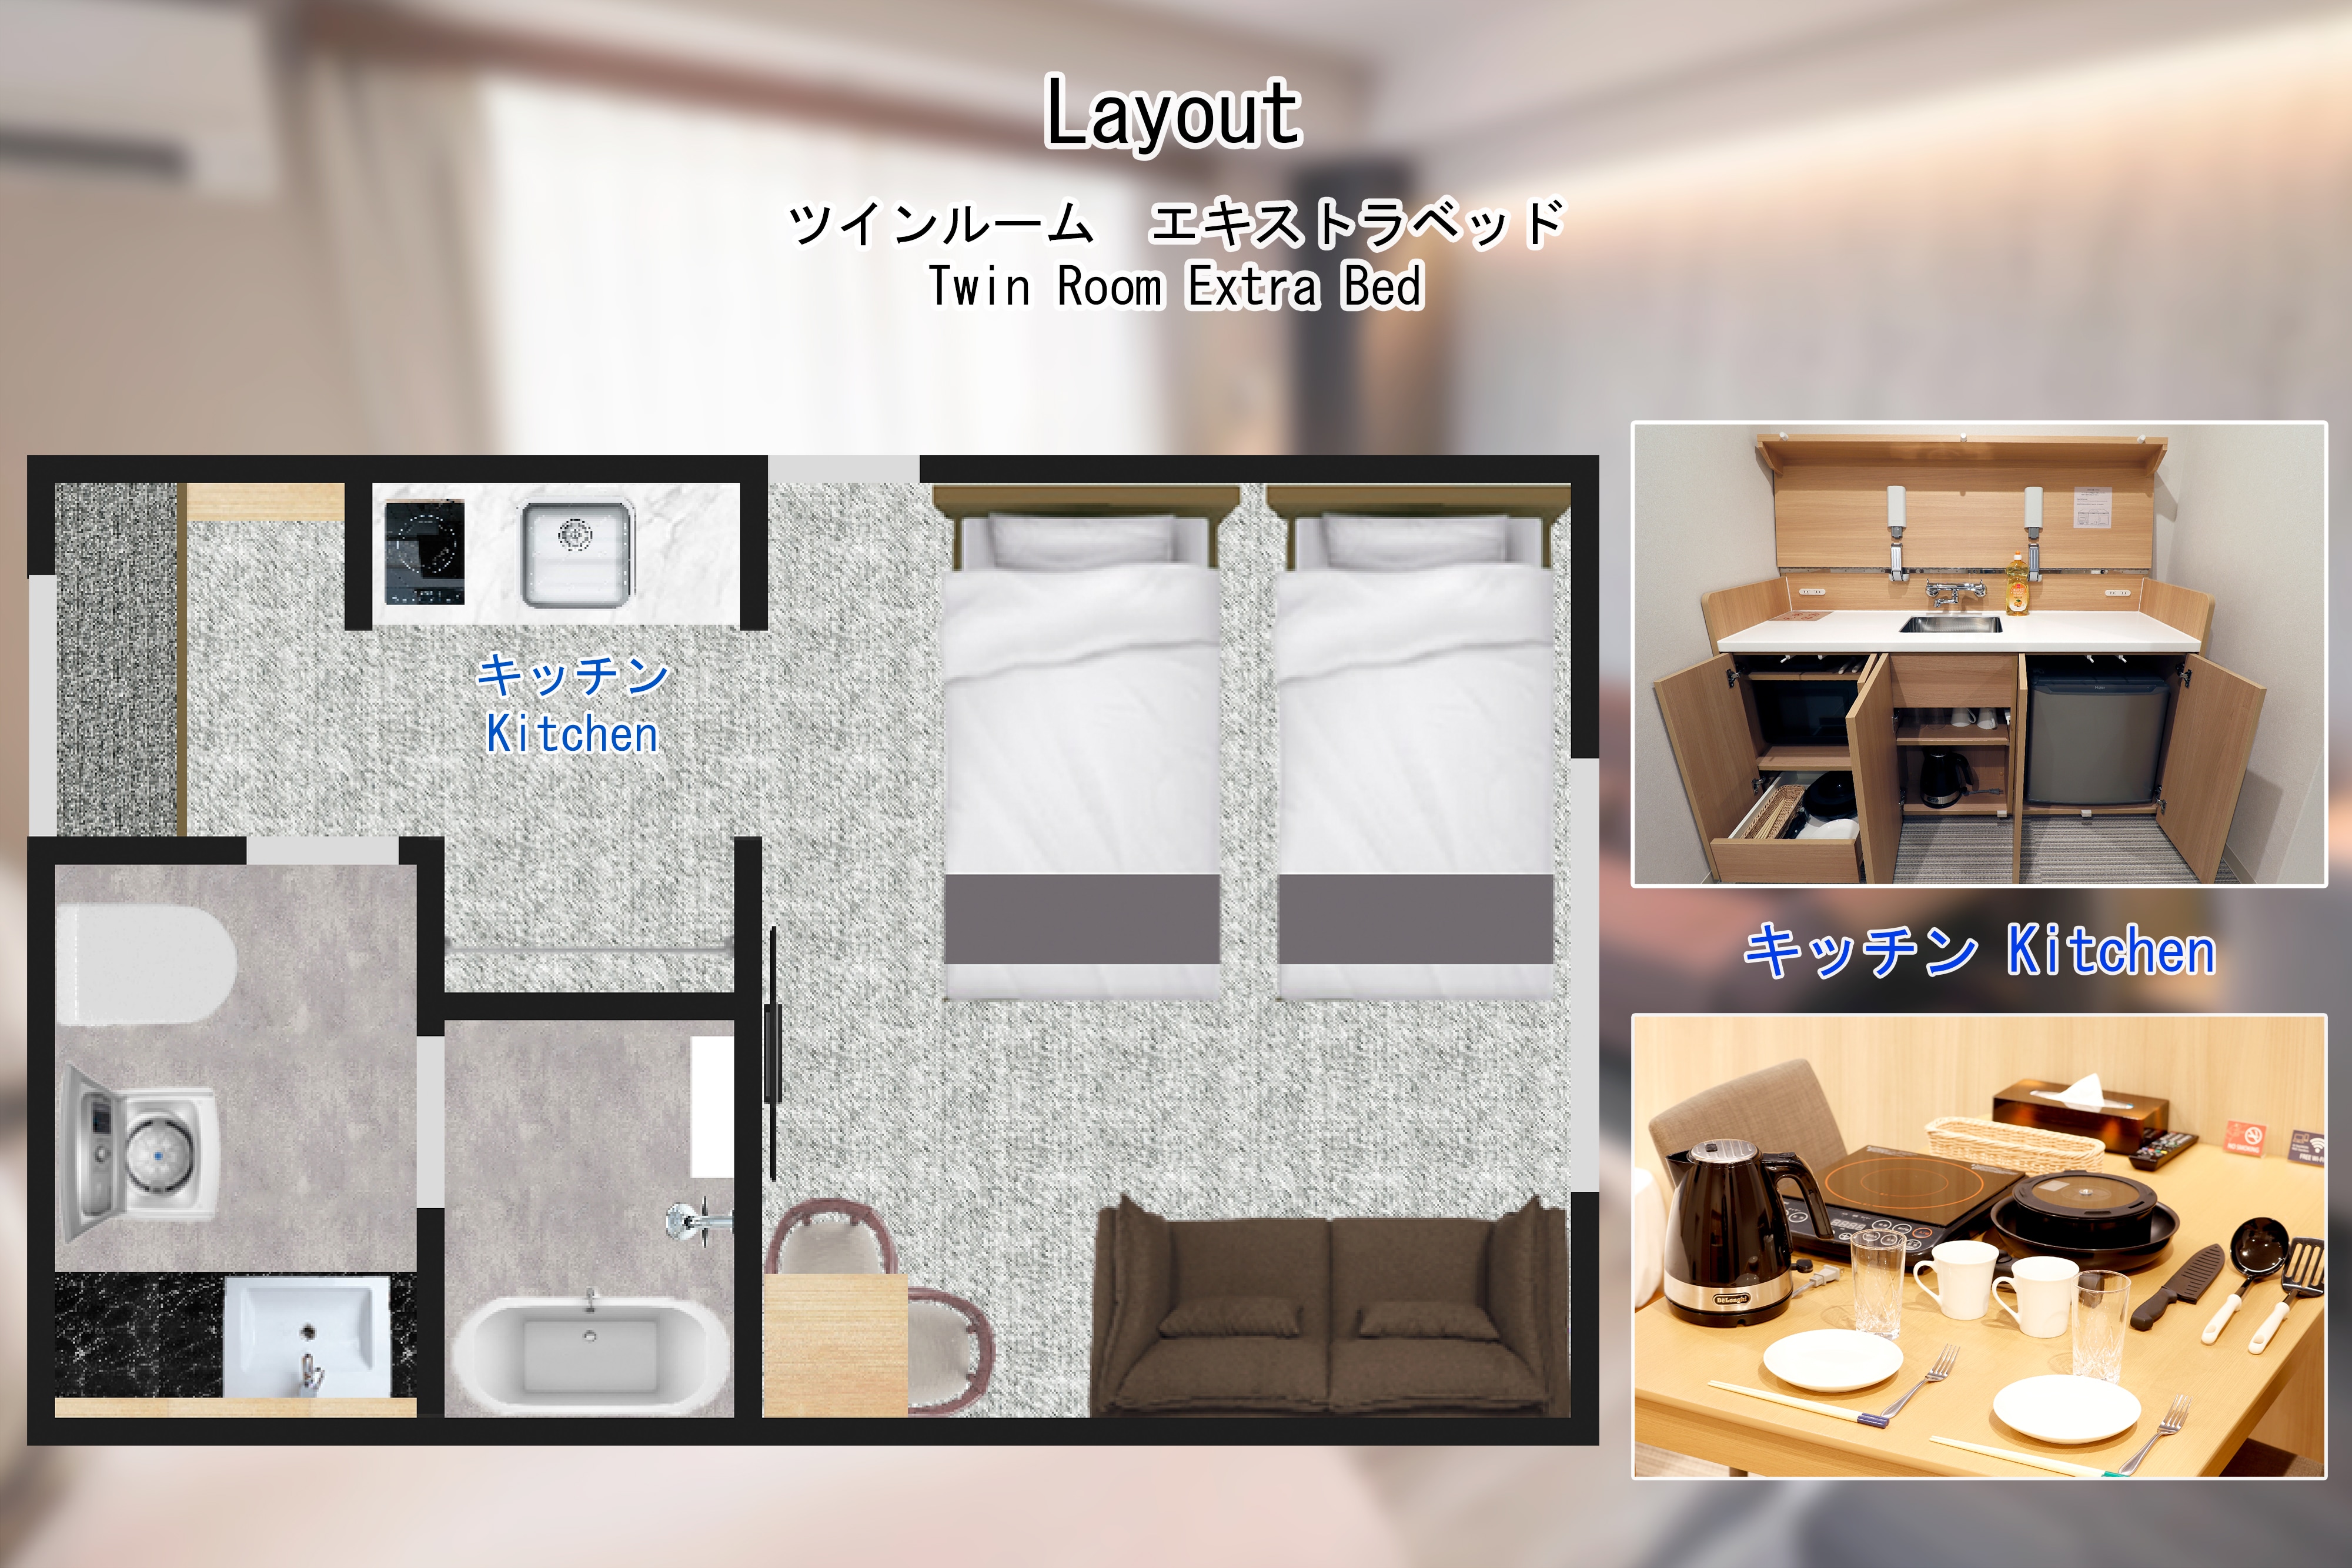 Twin room extra bed ◆ 25 sqm ◆ 2 single beds 113cm & times; 2 + 1 sofa bed